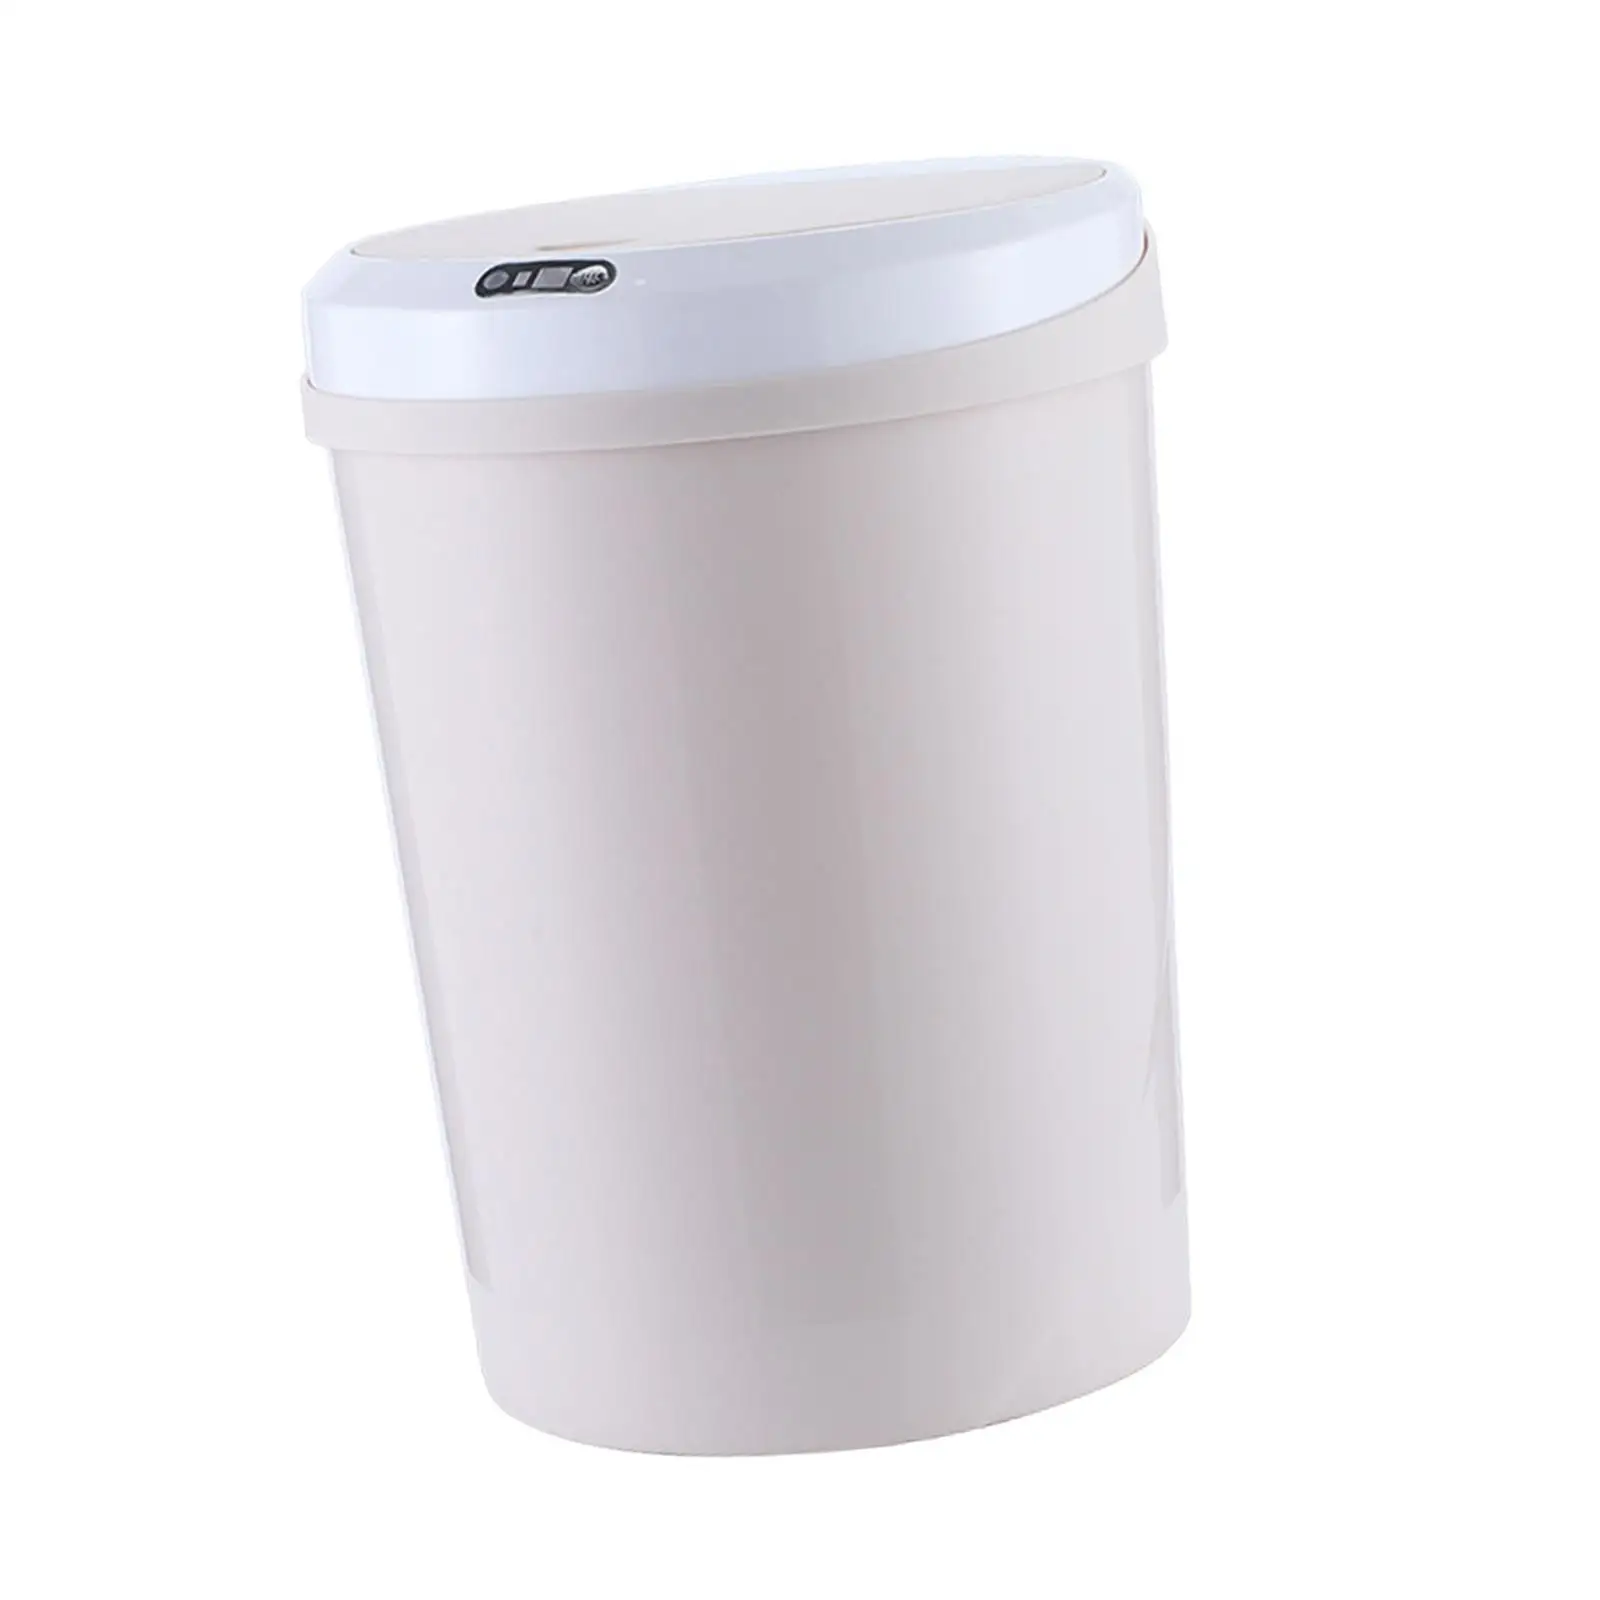 Smart Trash Can Waste Bins Dustbin Wastebasket Garbage Bucket Electric Garbage Can for Office Living Room Home Kitchen Toilet